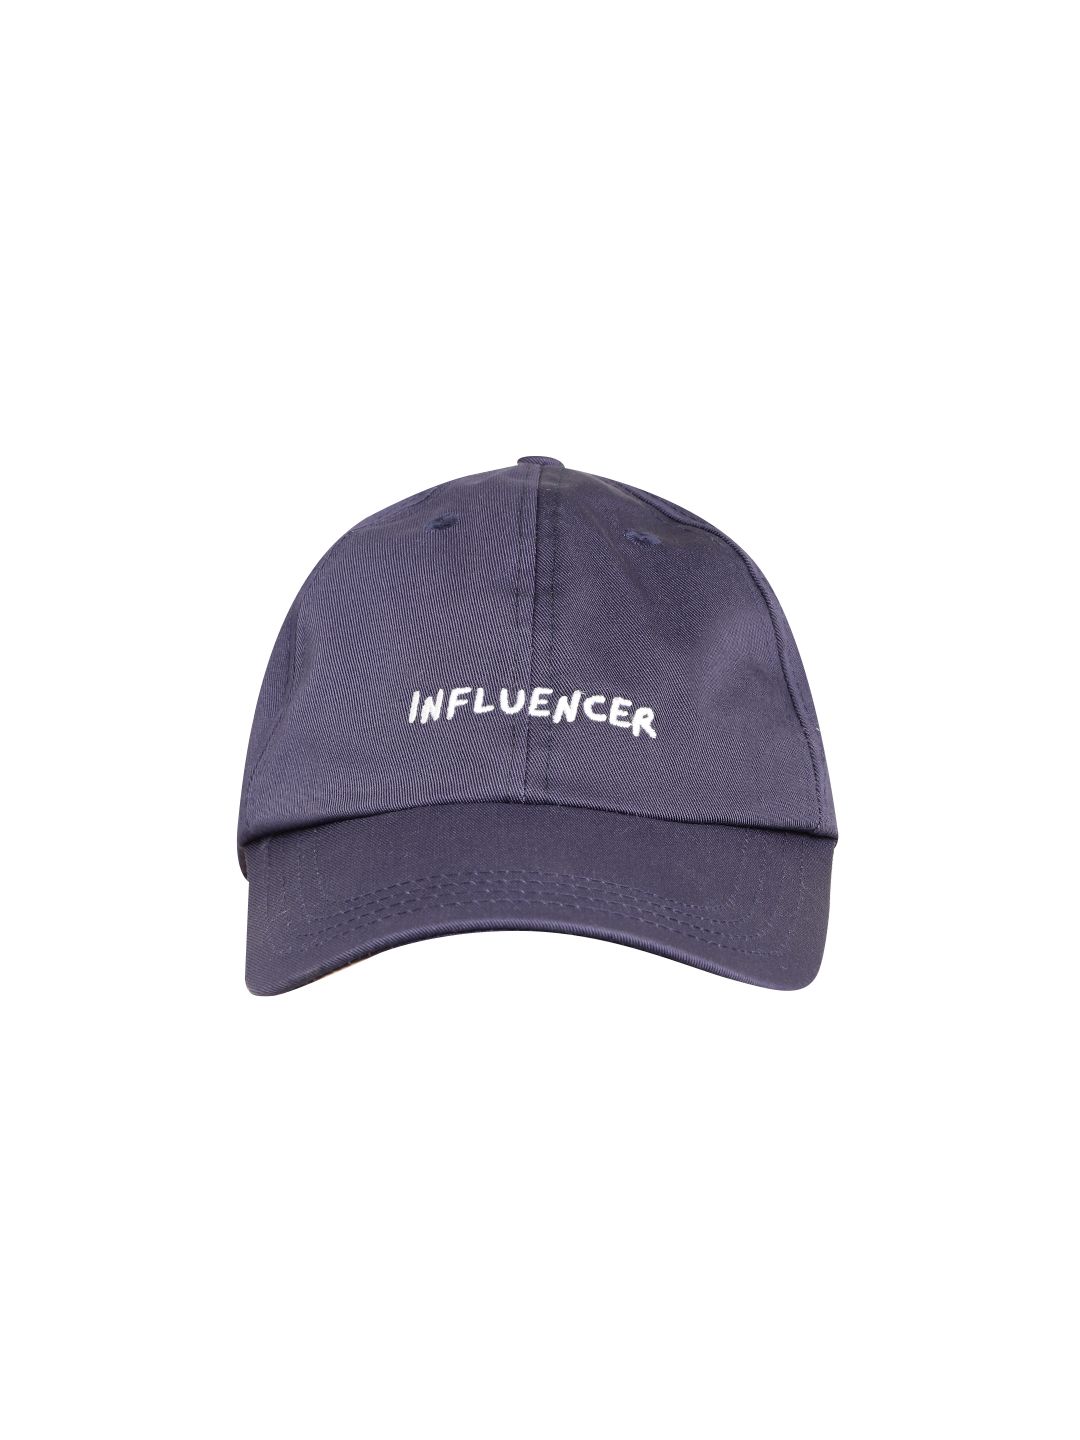 Blueberry Unisex Navy Blue & White Influencer Embroidered Baseball Cap Price in India